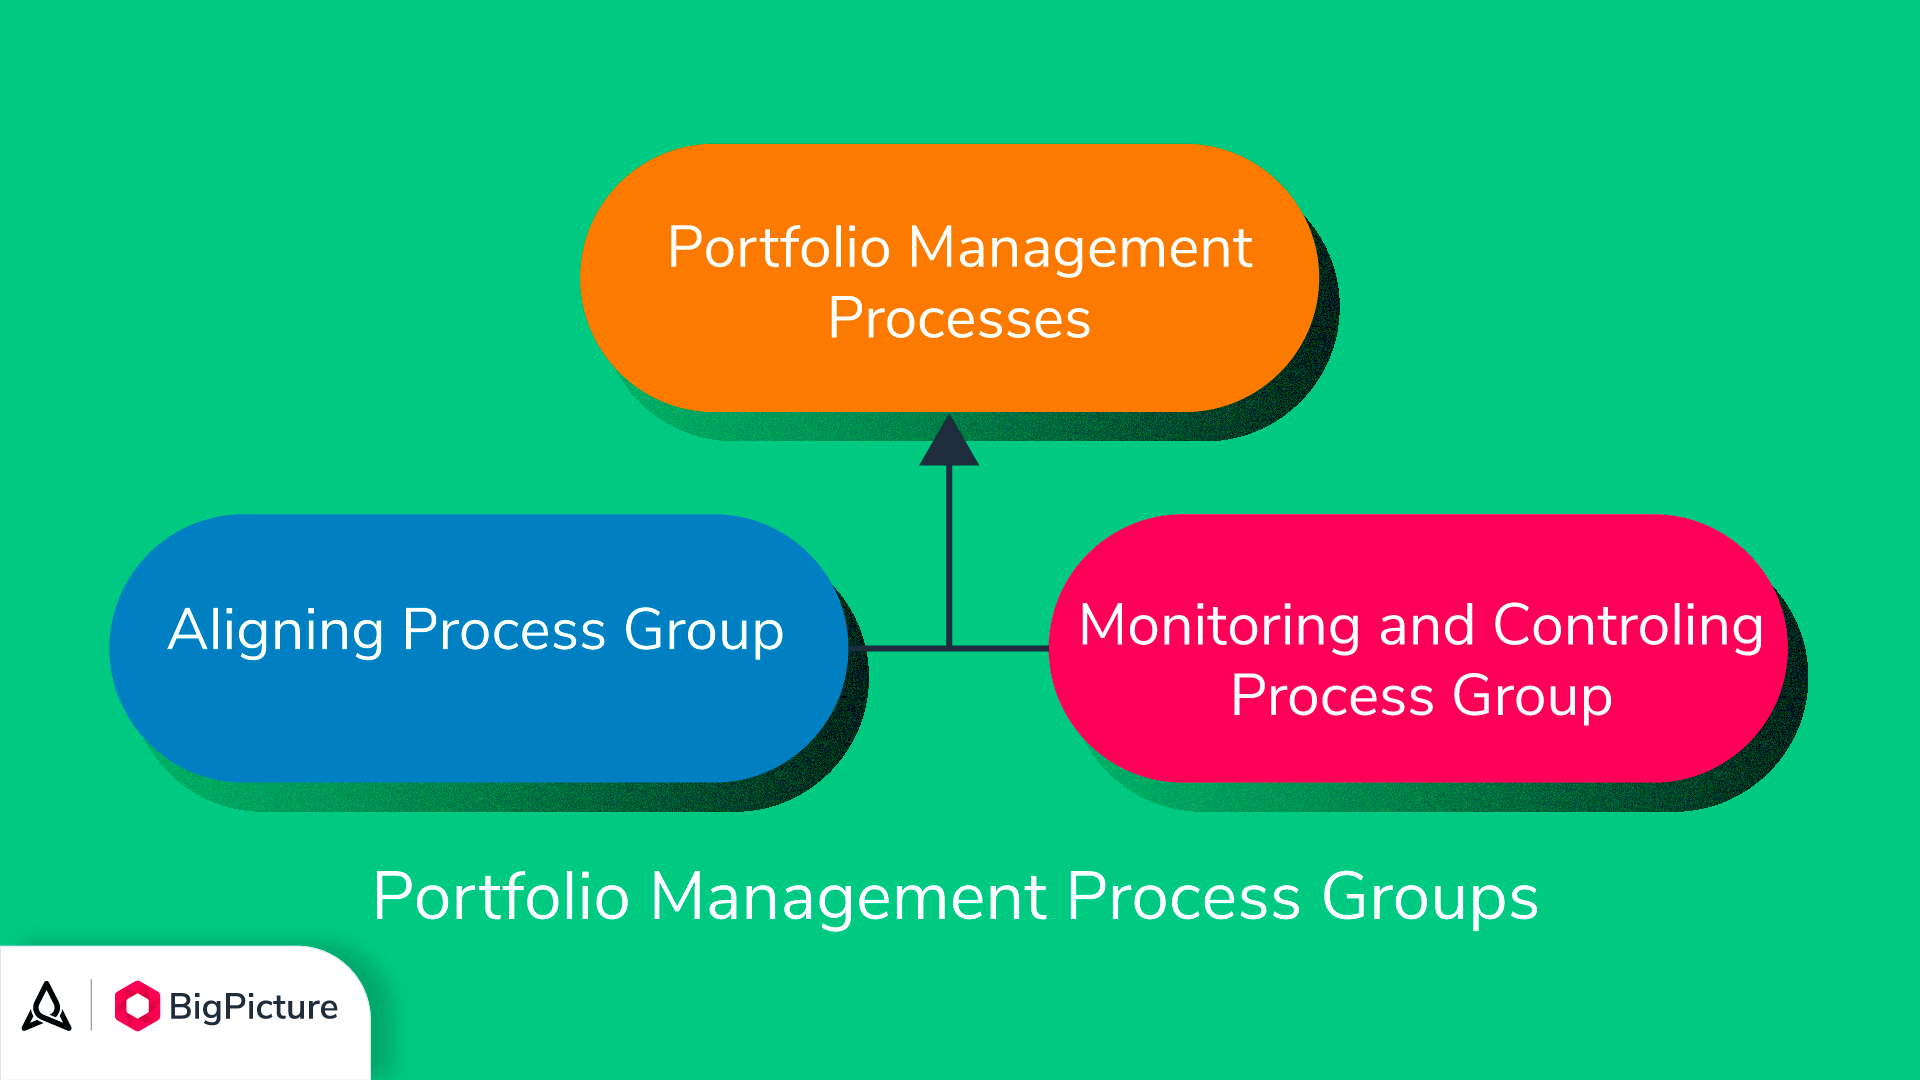 A chart with two groups of Project Portfolio Management processes Groups: Aligning Process Group and Monitoring and Controlling